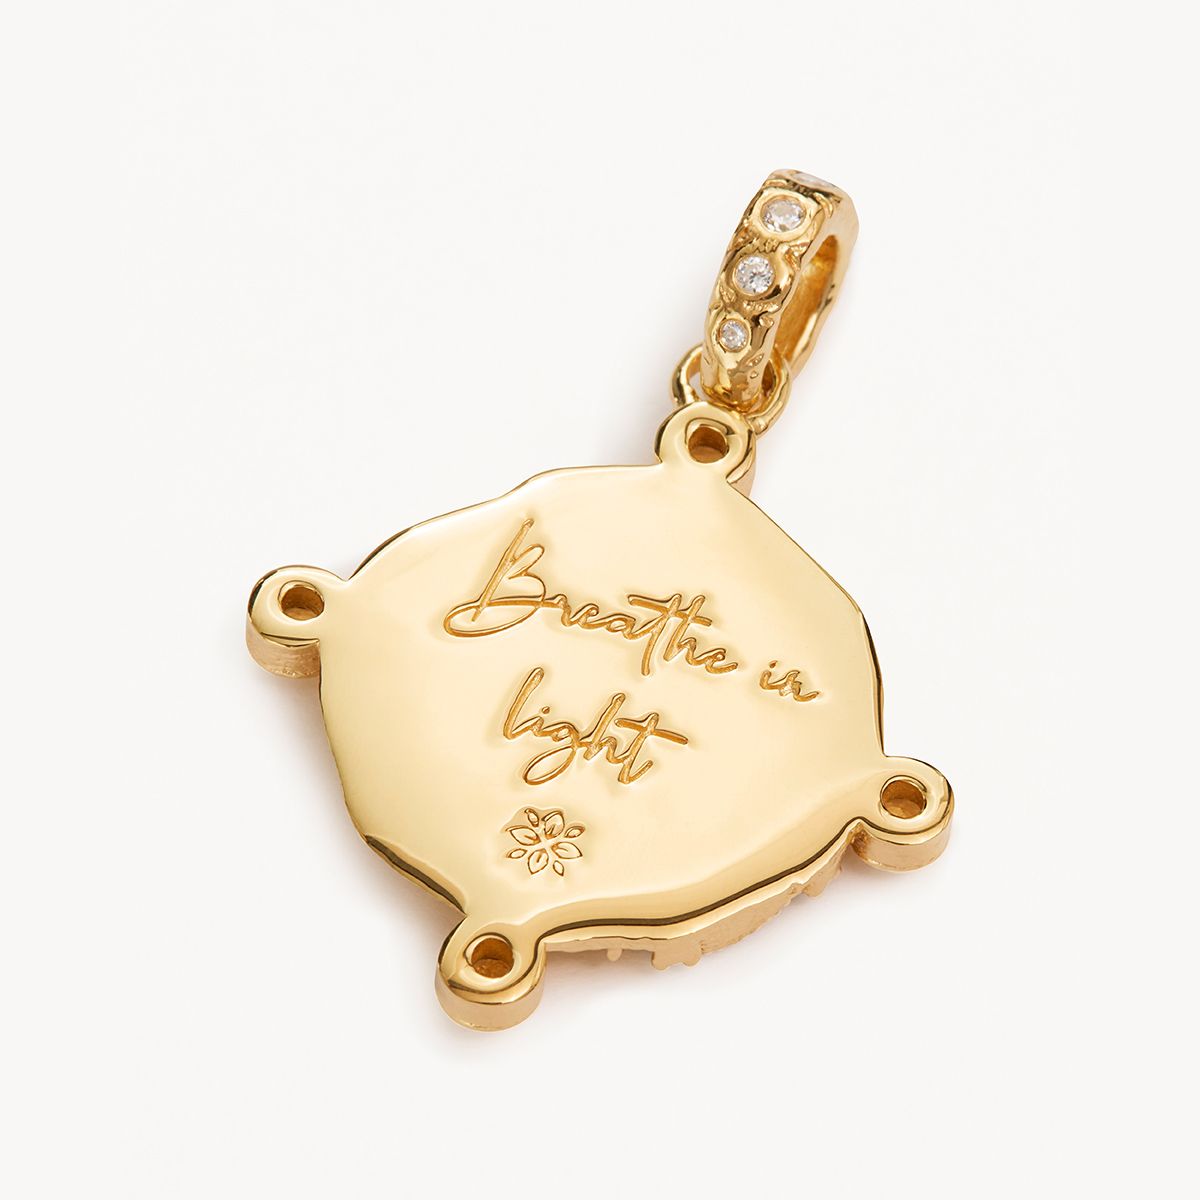 By Charlotte Breathe In Light Annex Necklace Pendant, Gold or Silver